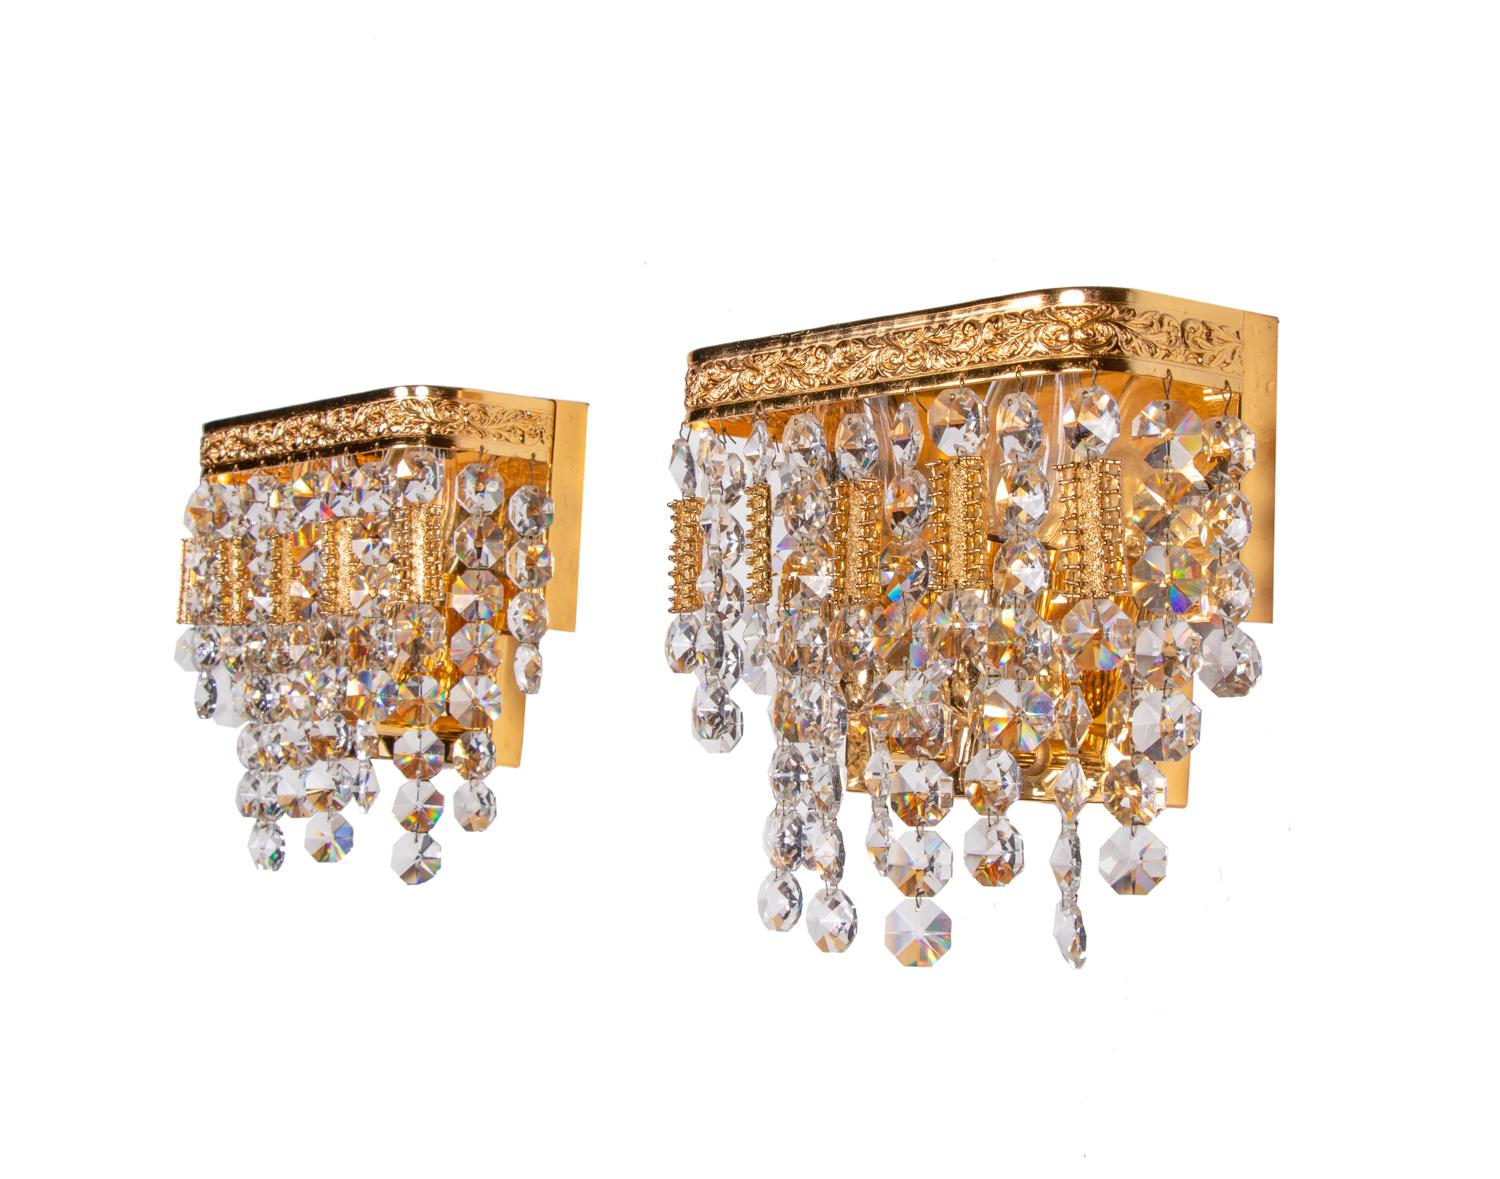 Elegant pair of wall sconces with a gold-plated brass frame and Swarovski crystals. These lamps have an incomparable unique character. A touch of luxury fills the room. Manufactured by Palwa (Palme & Walter), Germany in the 1960s. 

Manufacturer: